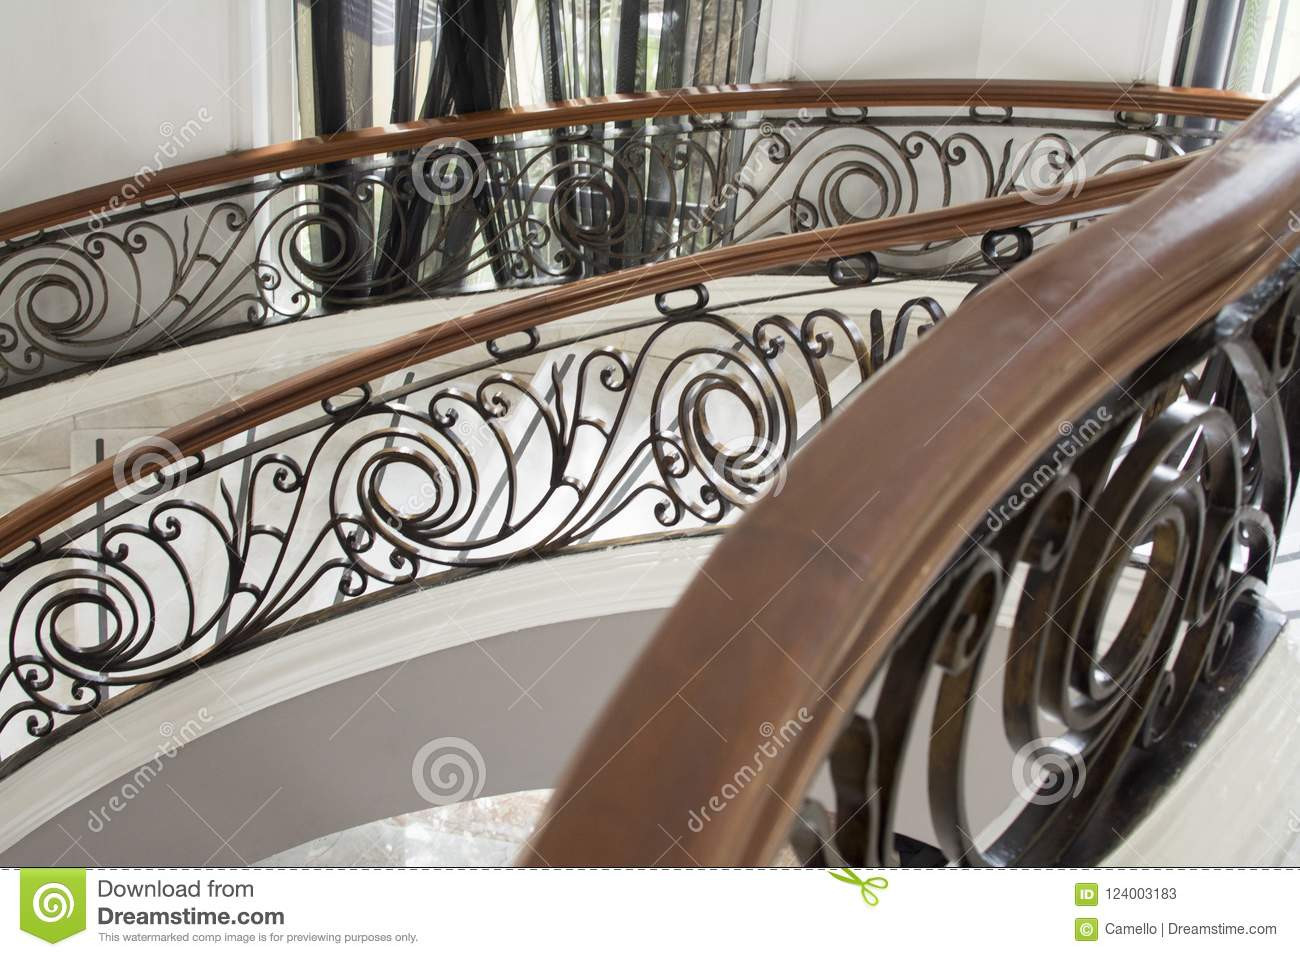 15 Popular How to Hardwood Floor Stairs 2024 free download how to hardwood floor stairs of marble stairs with wood and steel decoration stock image image of throughout download marble stairs with wood and steel decoration stock image image of stair 